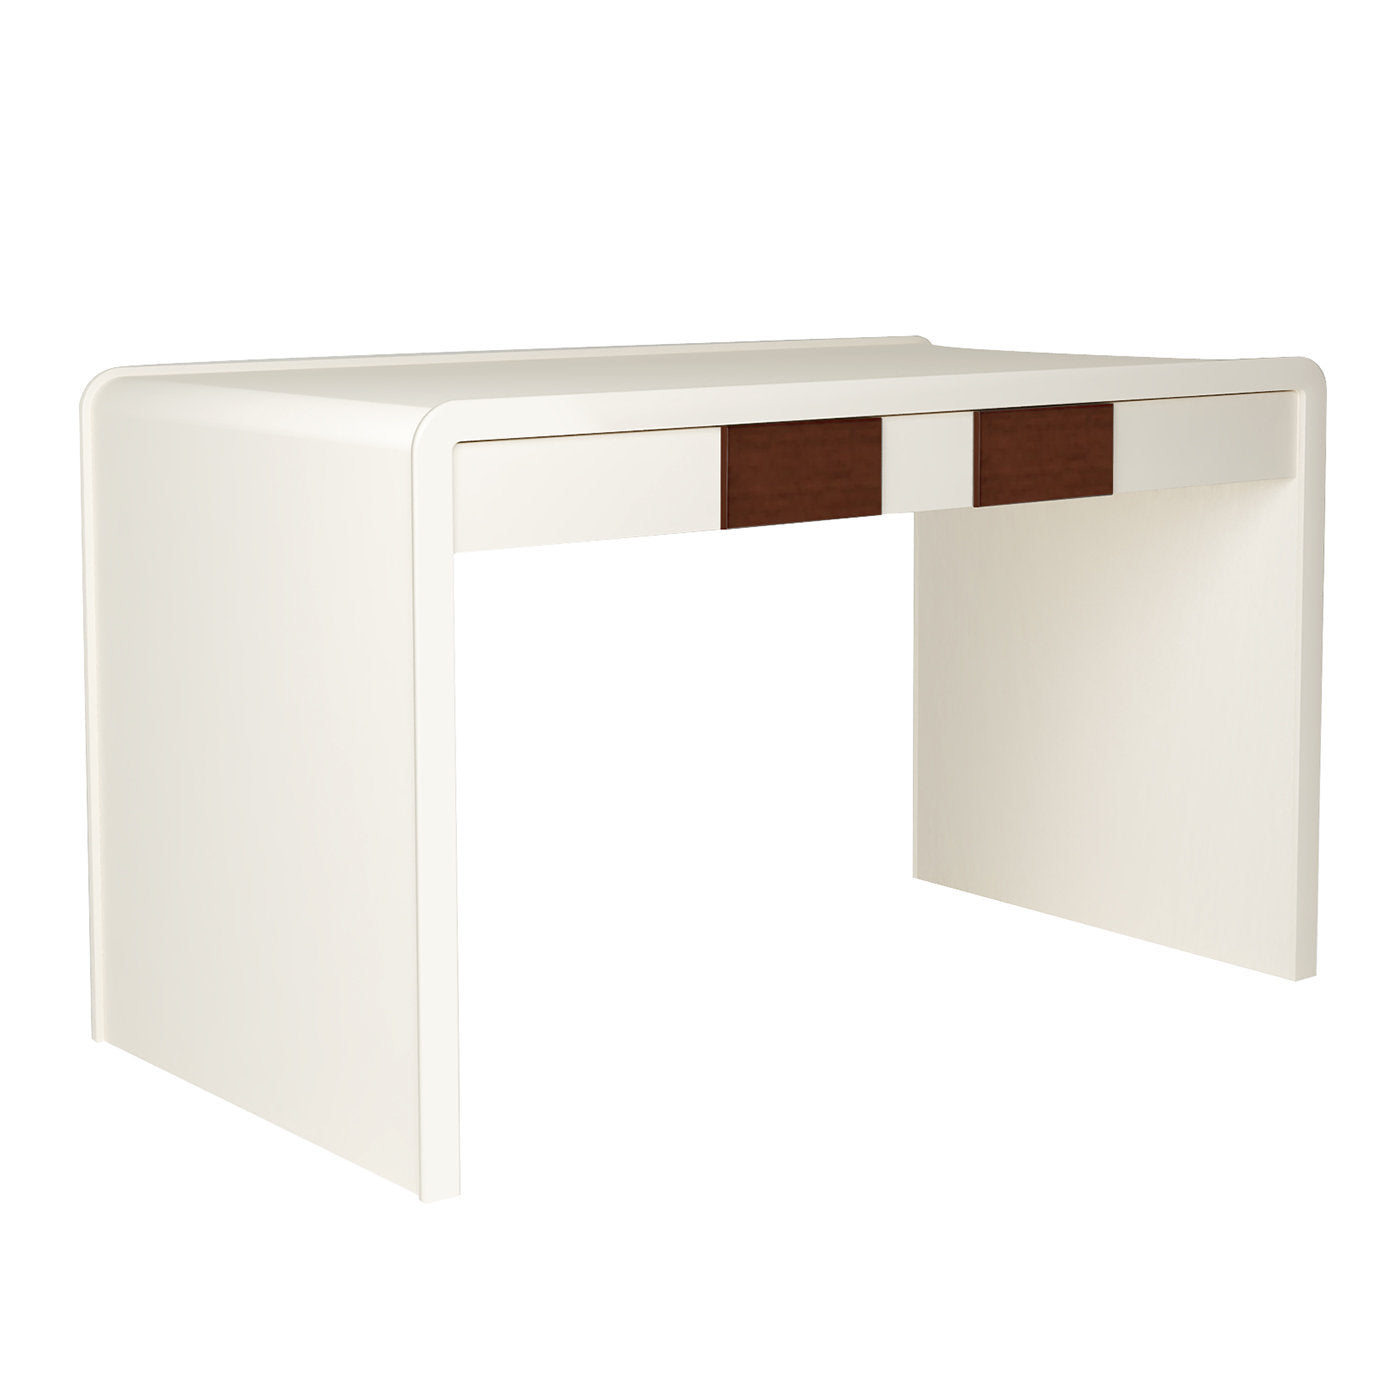 Irma Desk Ivory and Nut Brown - Alternative view 1